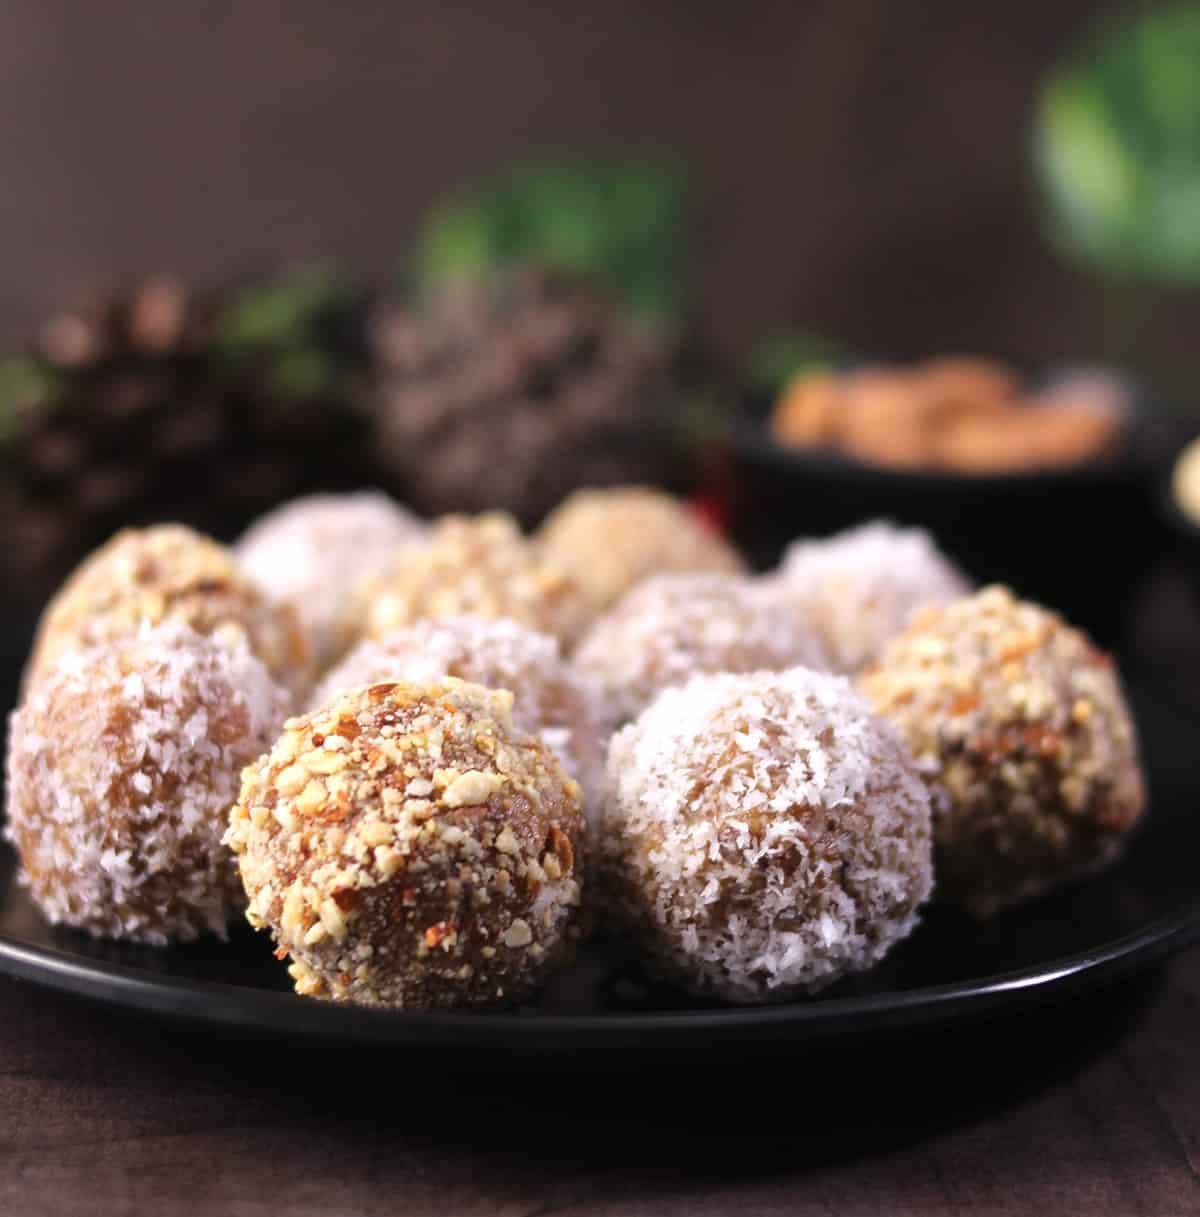 Best no-bake desserts for holidays. Christmas energy balls, holiday bliss balls with date, coconut. 